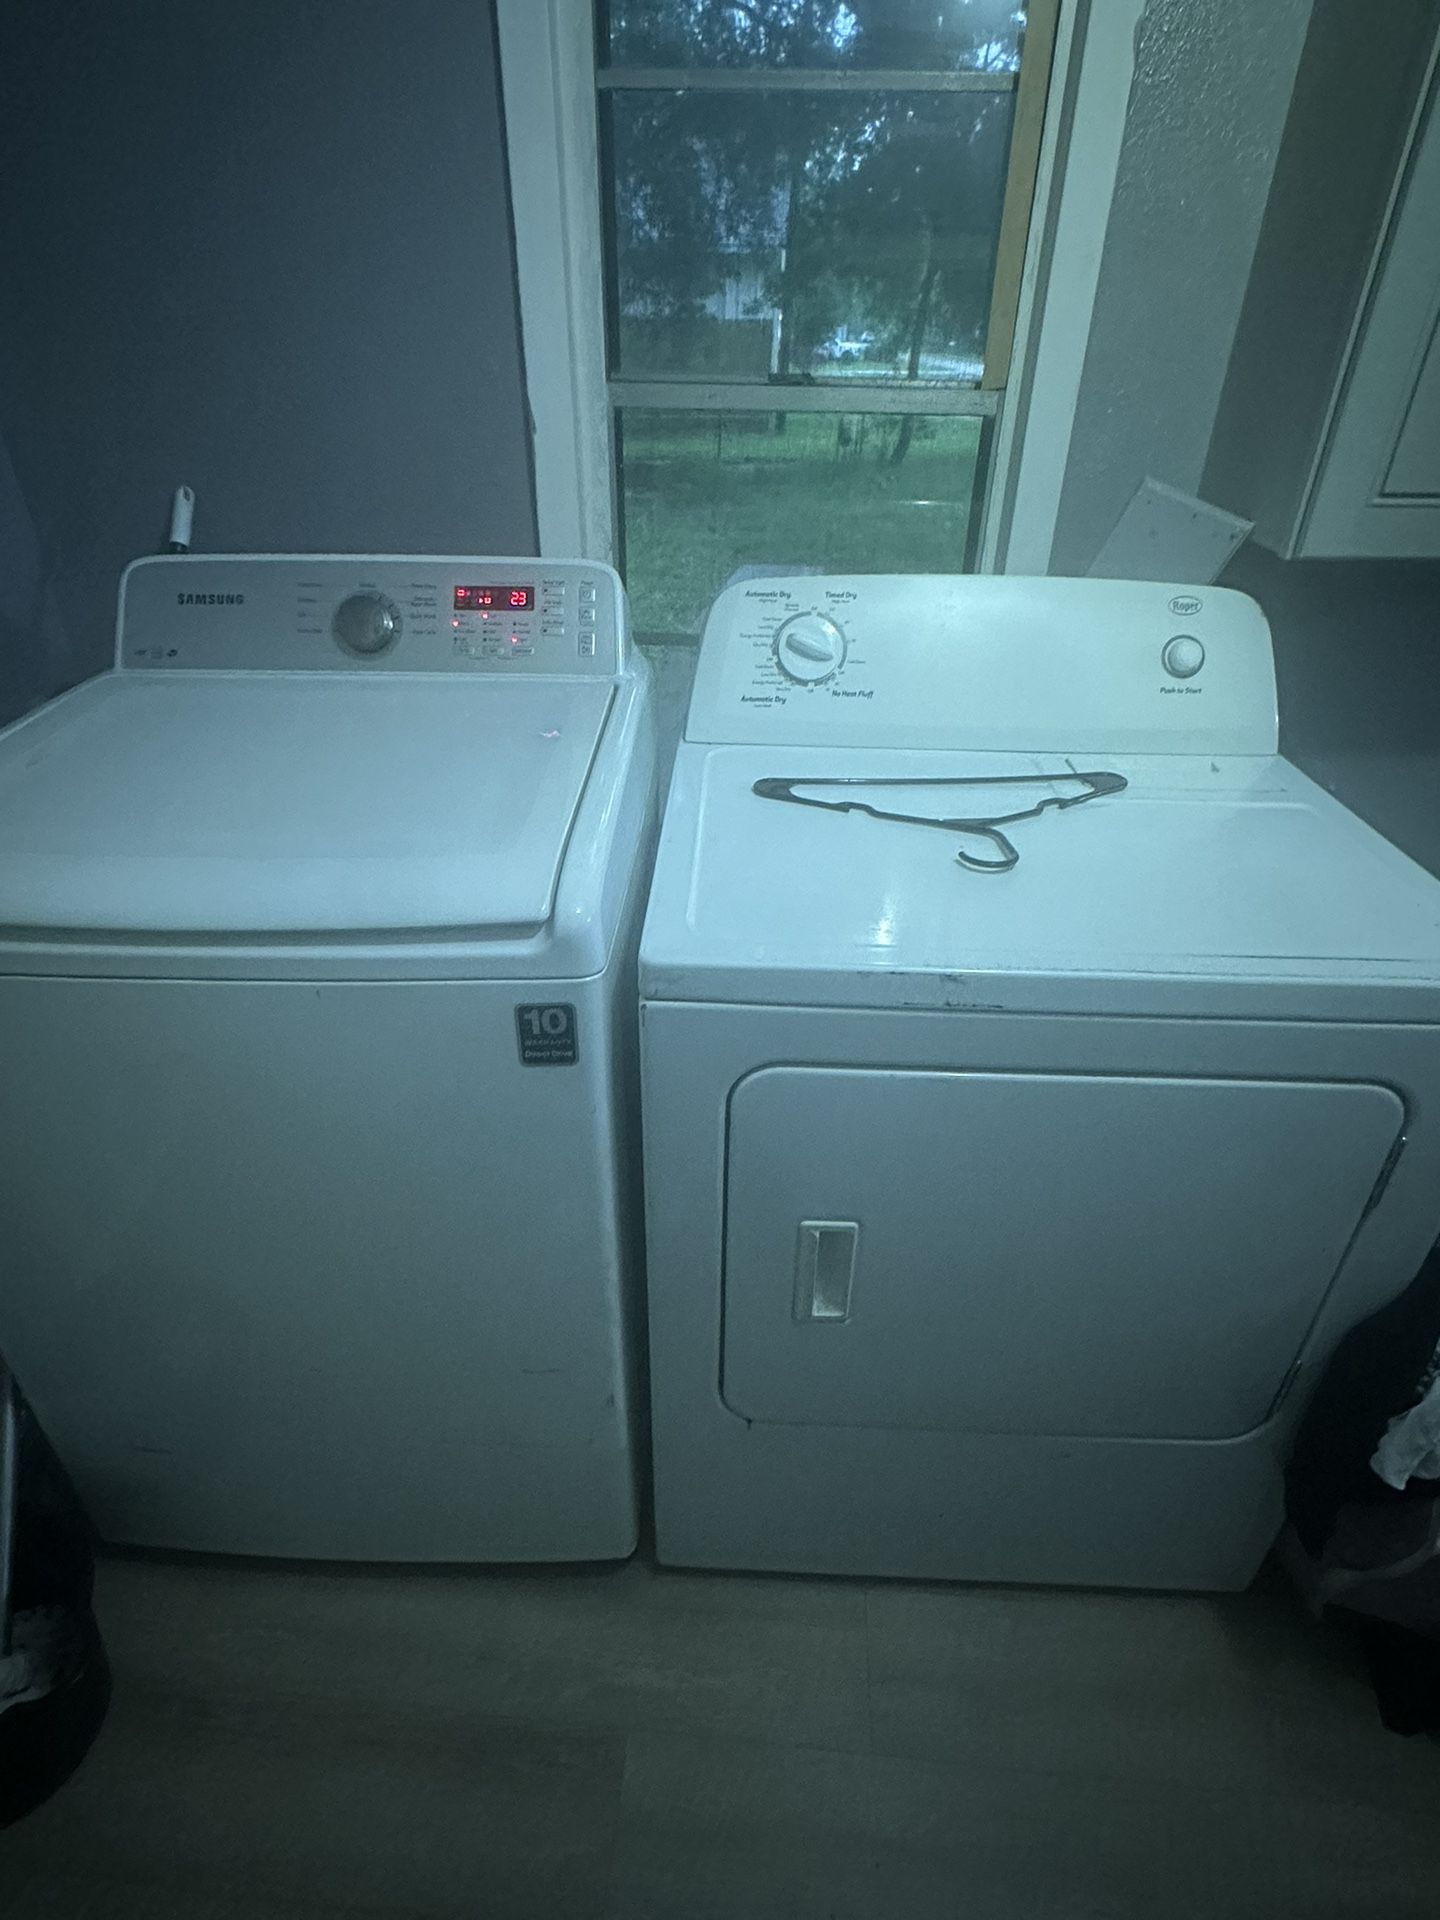 Washer And Dryer Excellent Condition…